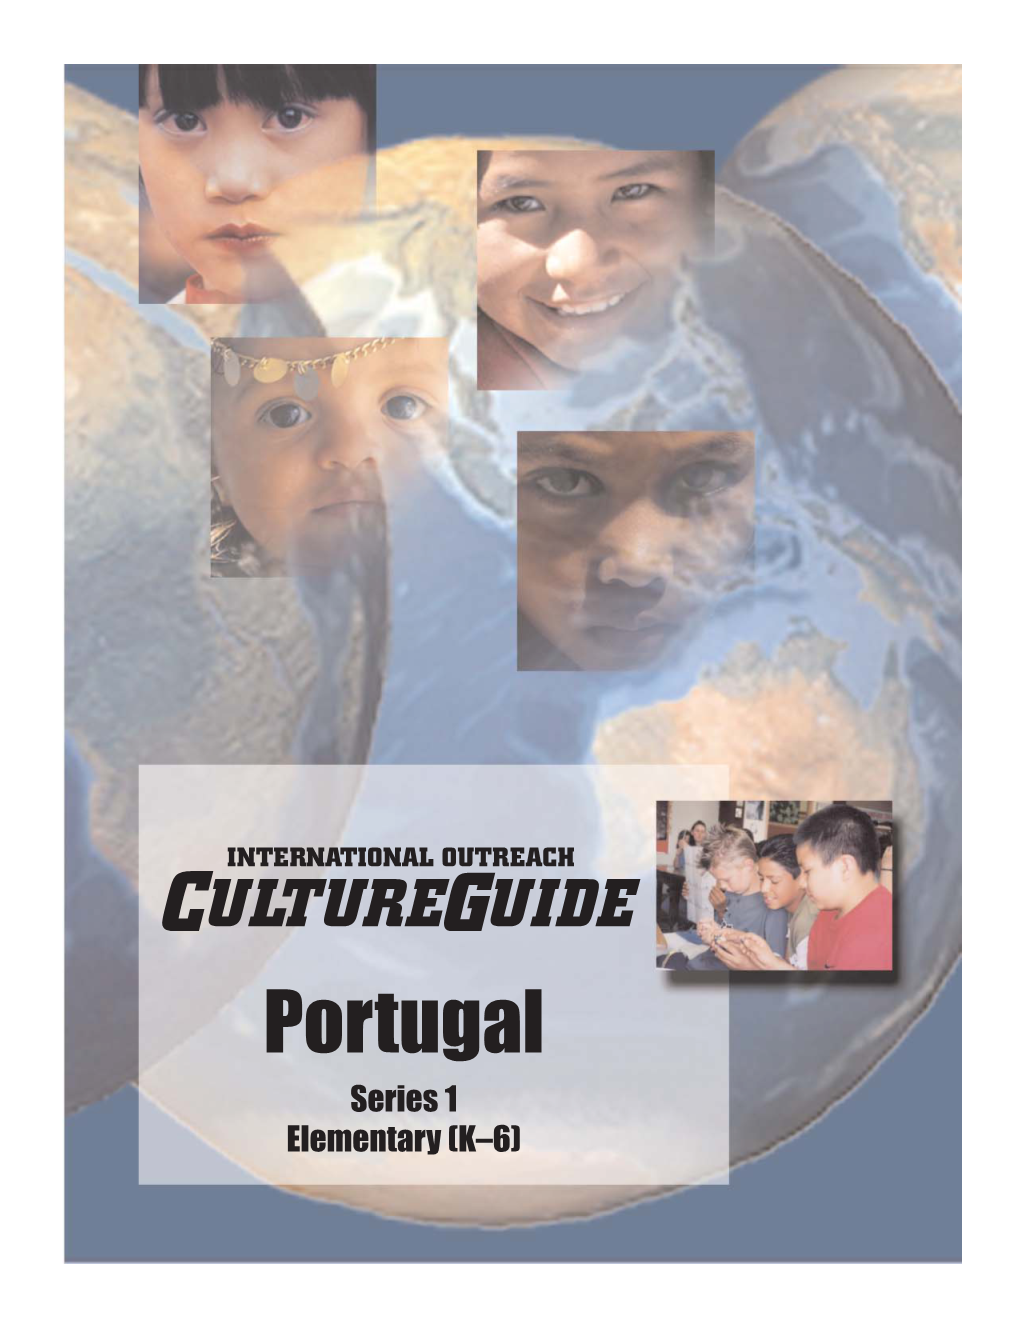 Portugal Series 1 Elementary (K–6) TABLE of CONTENTS